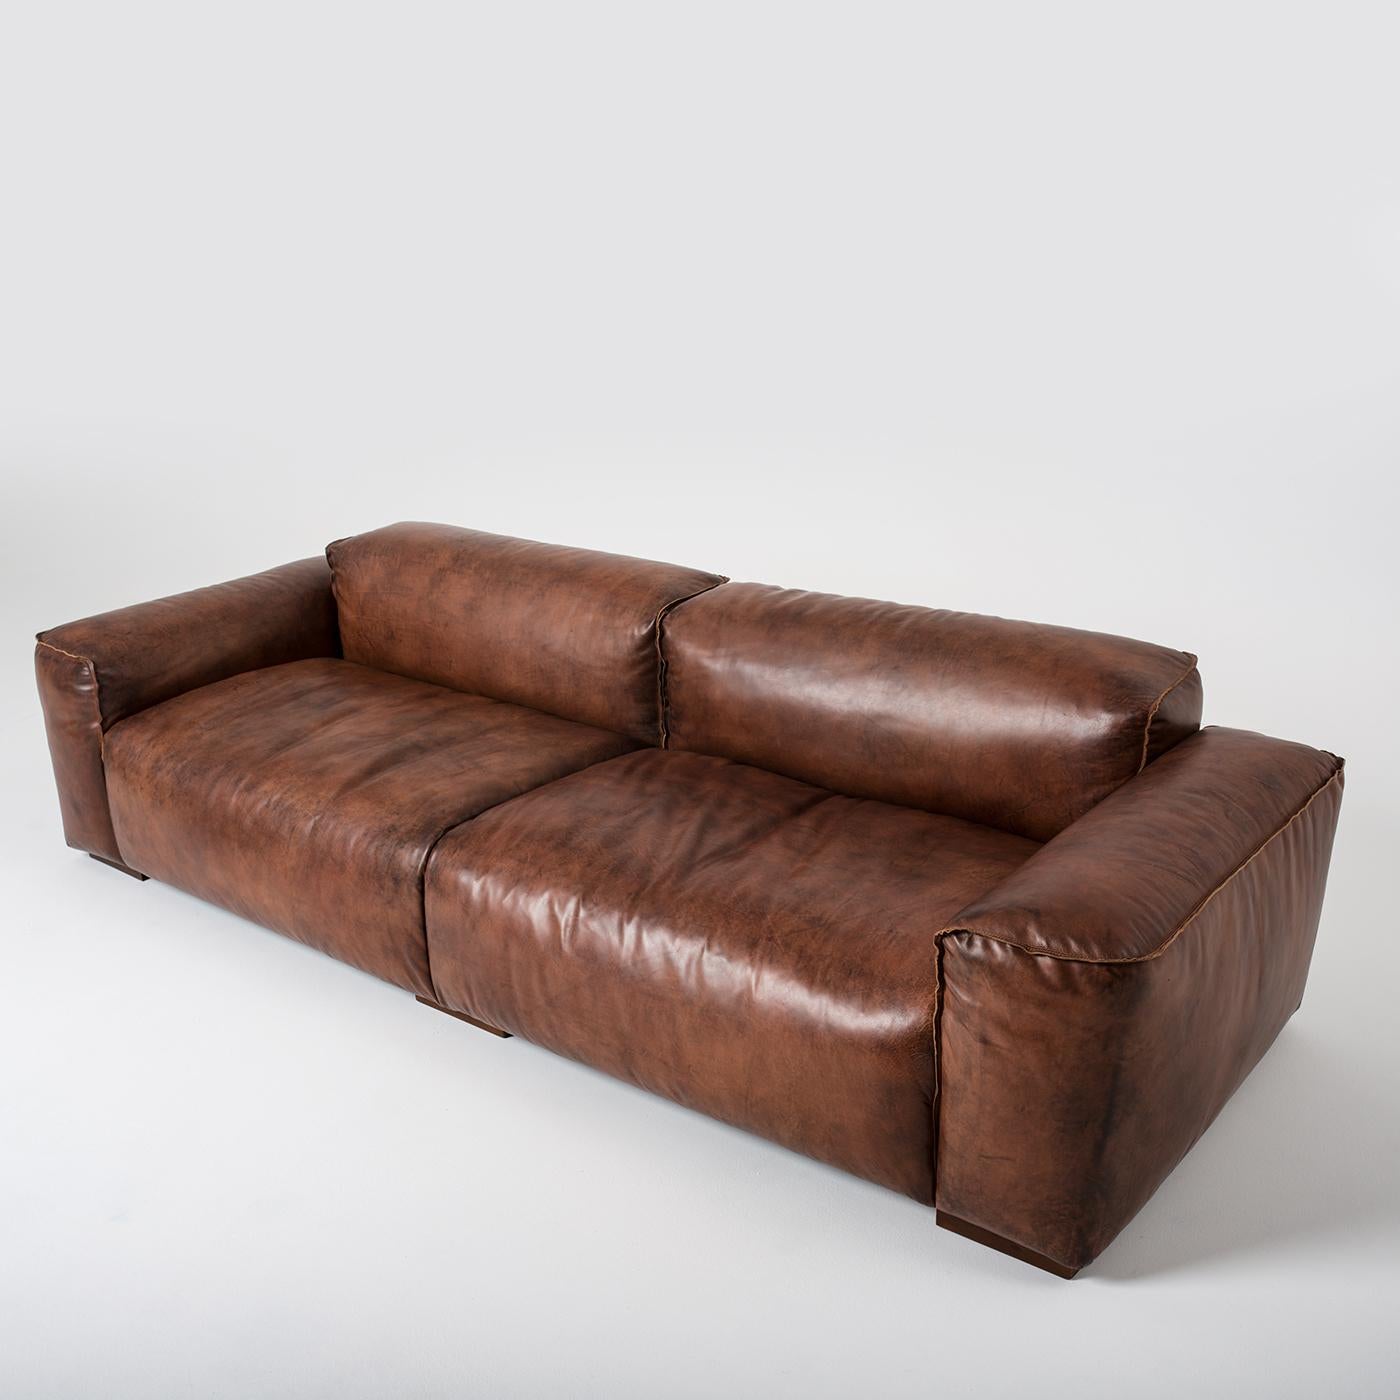 Essential and elegant vintage leather sofa. The raw-cut seams draw the rigorous silhouette creating a meticulous coherence between beauty, simplicity and solidity. The legs are squared in walnut-stained beech.
     